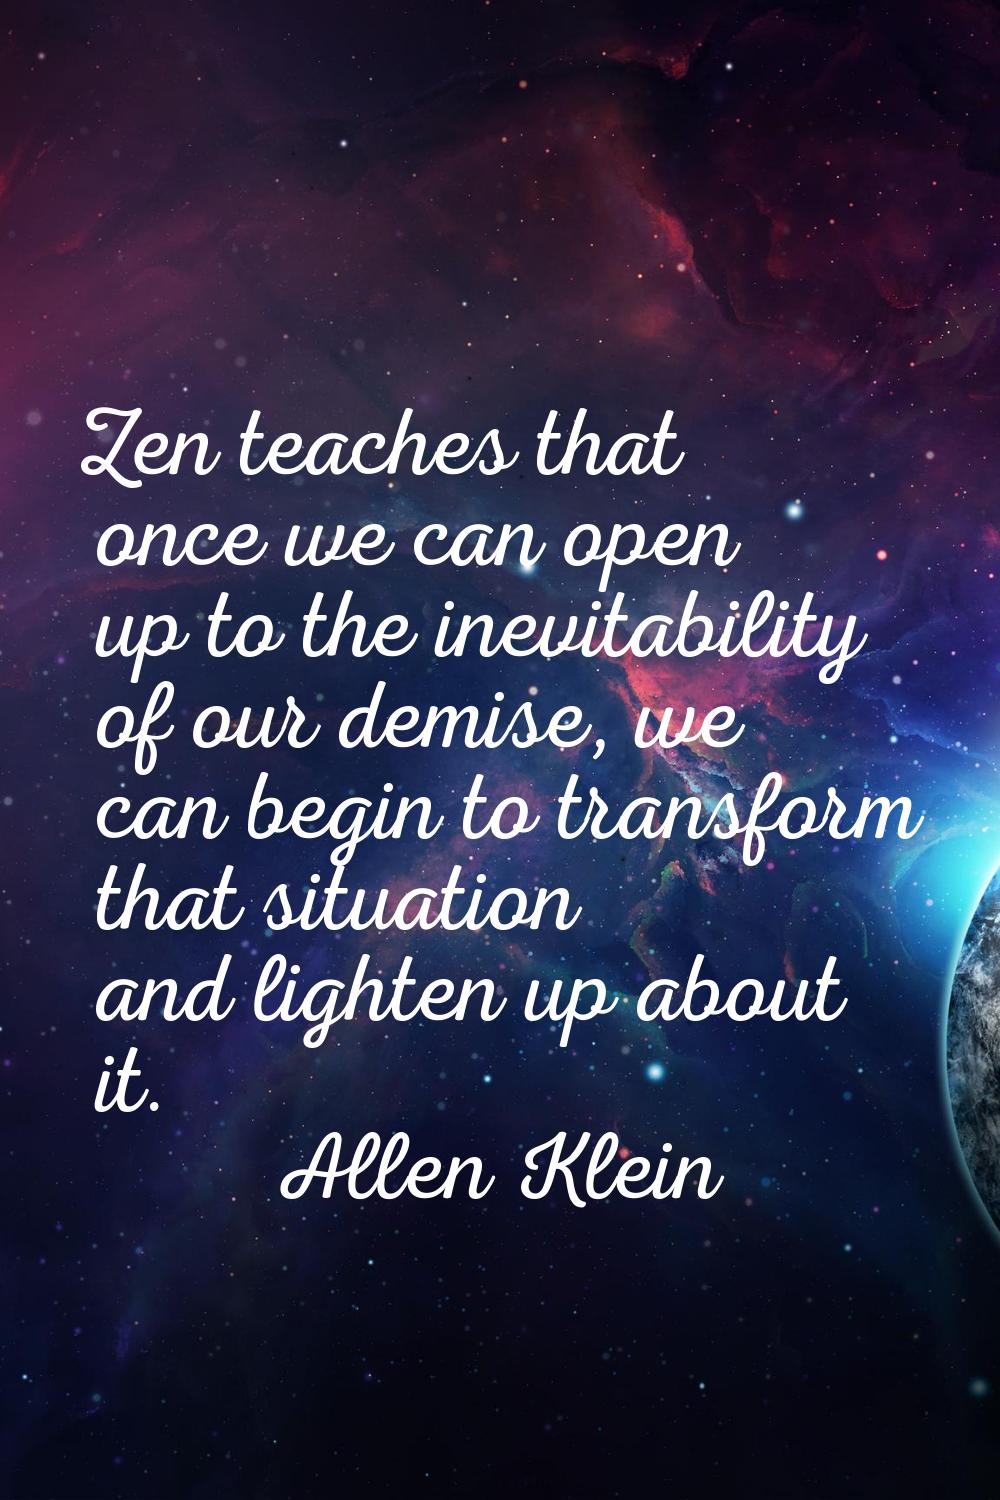 Zen teaches that once we can open up to the inevitability of our demise, we can begin to transform 